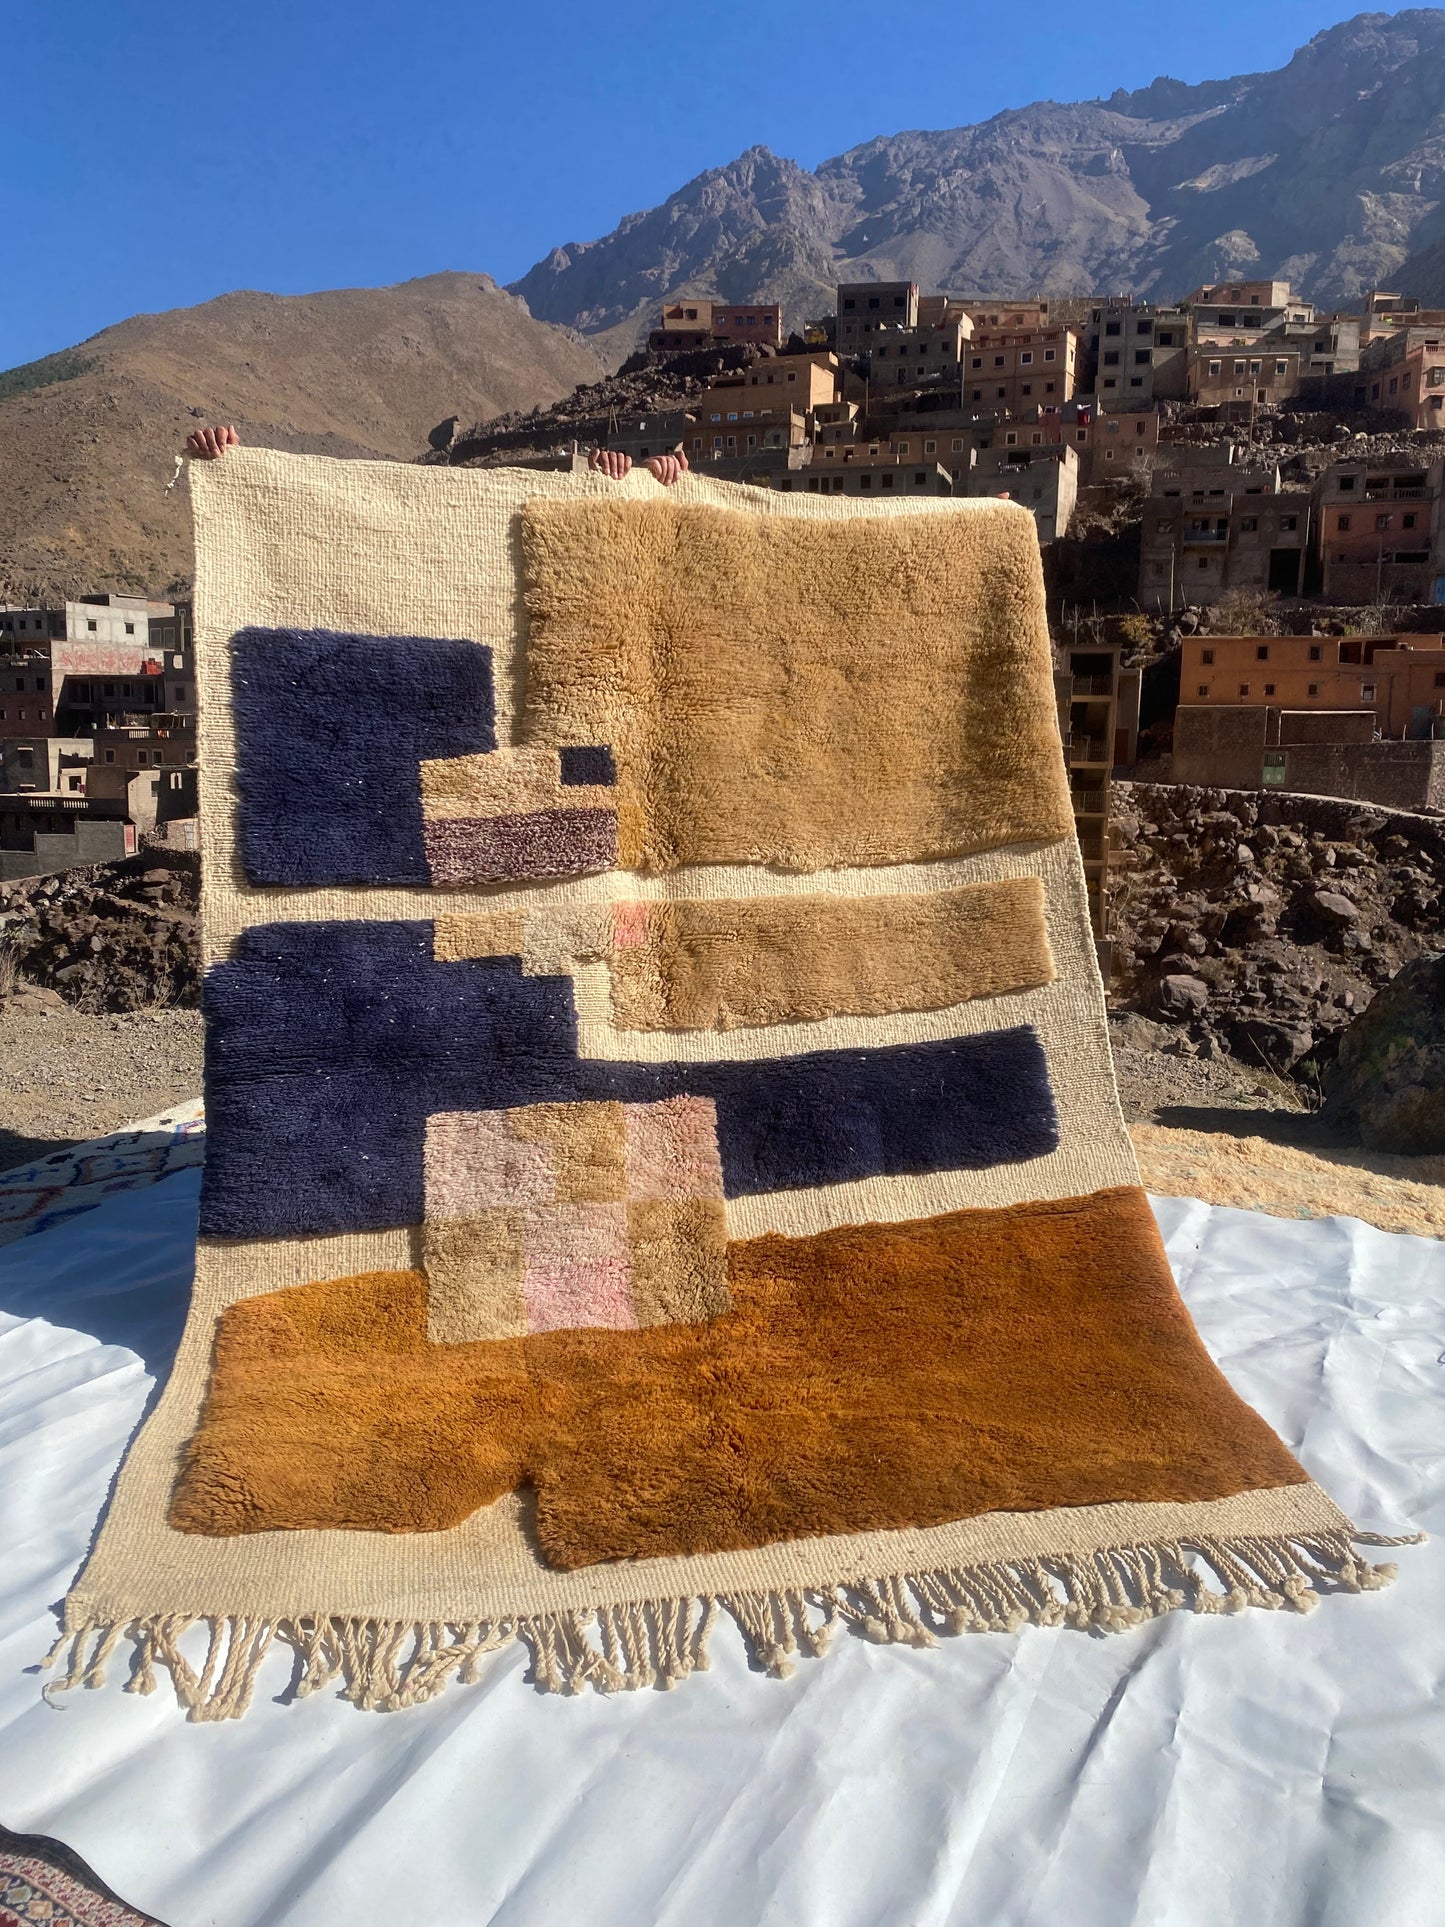 Beni Ourain rugs originate from the Atlas Mountains of Morocco and are characterized by their distinctive, neutral-toned, and geometric designs. These handwoven rugs often feature a plush pile and are made by the Berber tribes,  size is 260x165 cm